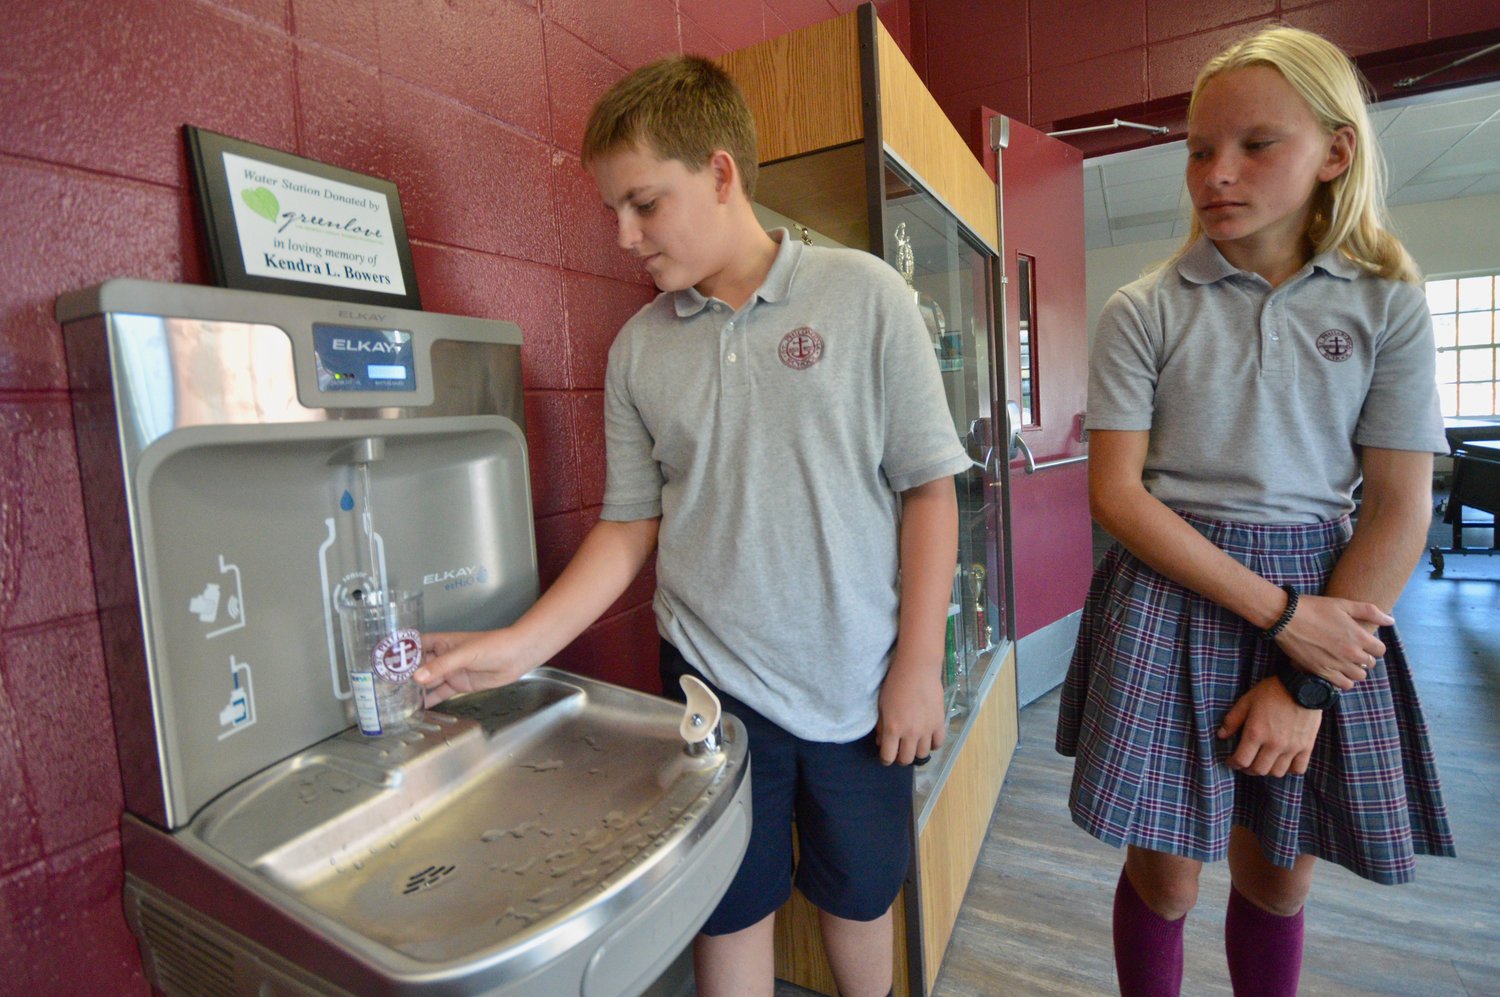 Chris DeSantis and Julia Pelczarski, both eighth-graders at St. Philomena School, try out the new water bottle filling station that was donated by the Greenlove Foundation.